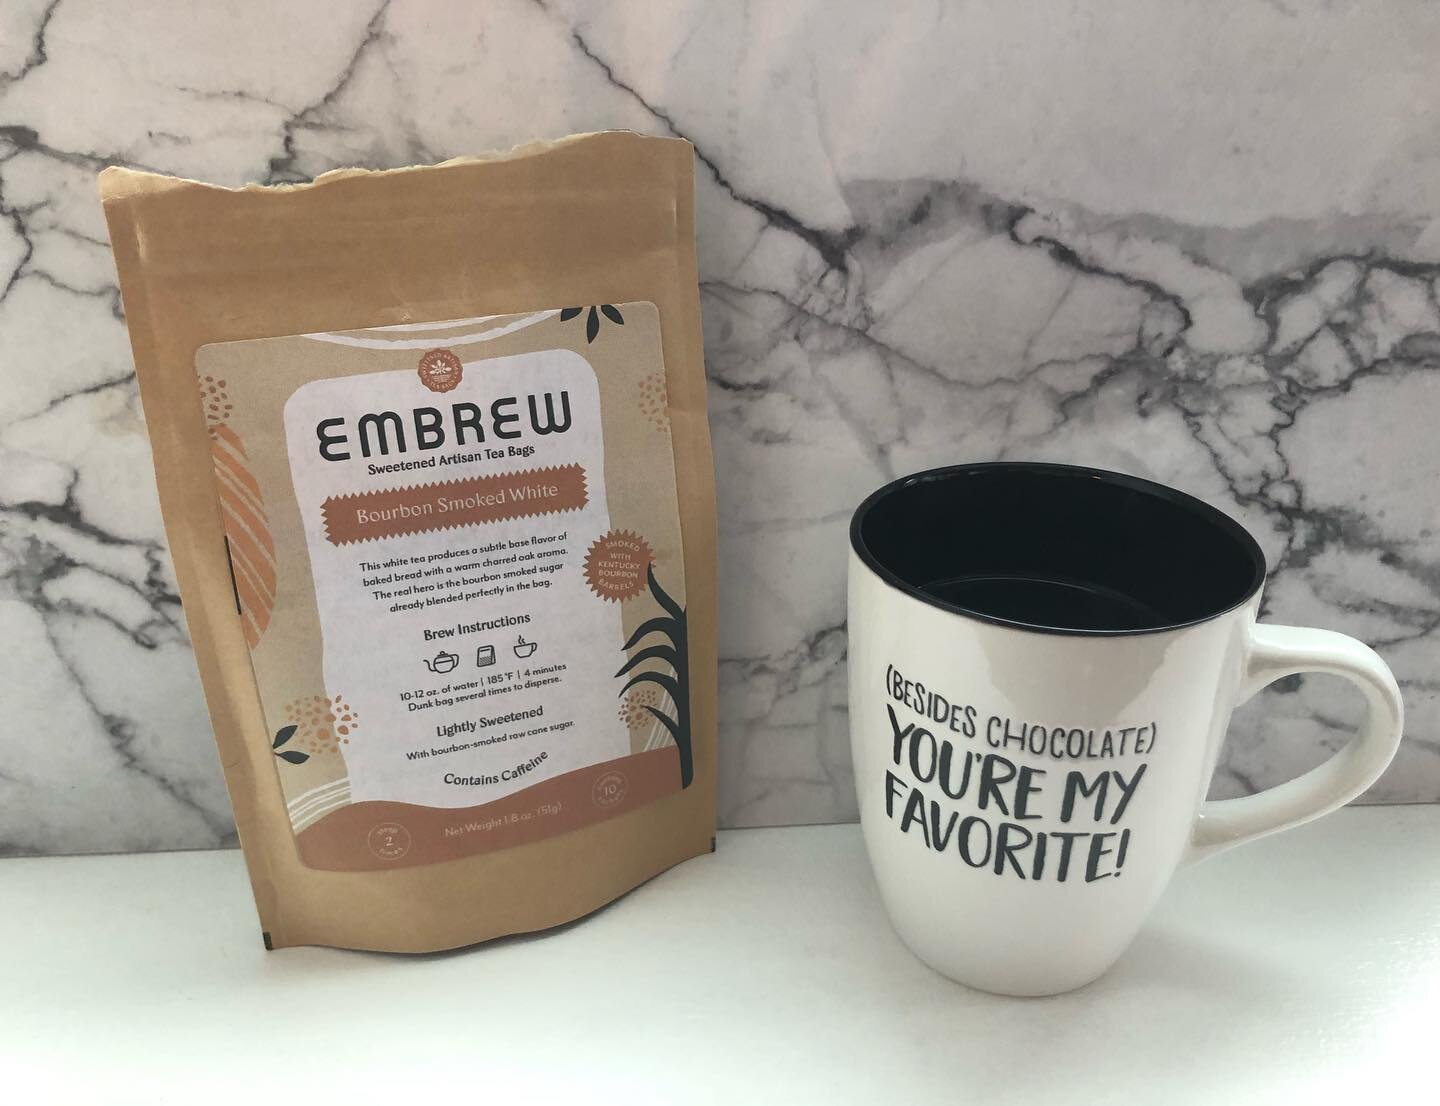 This mug doesn&rsquo;t photograph tea well since it&rsquo;s dark on the inside, but I couldn&rsquo;t think of a better one to use for @embrewtea Bourbon Smoked White 😊
&bull;
#embrew #BourbonSmoked #SmokedSugar #WhiteTea #HotTea #demerara